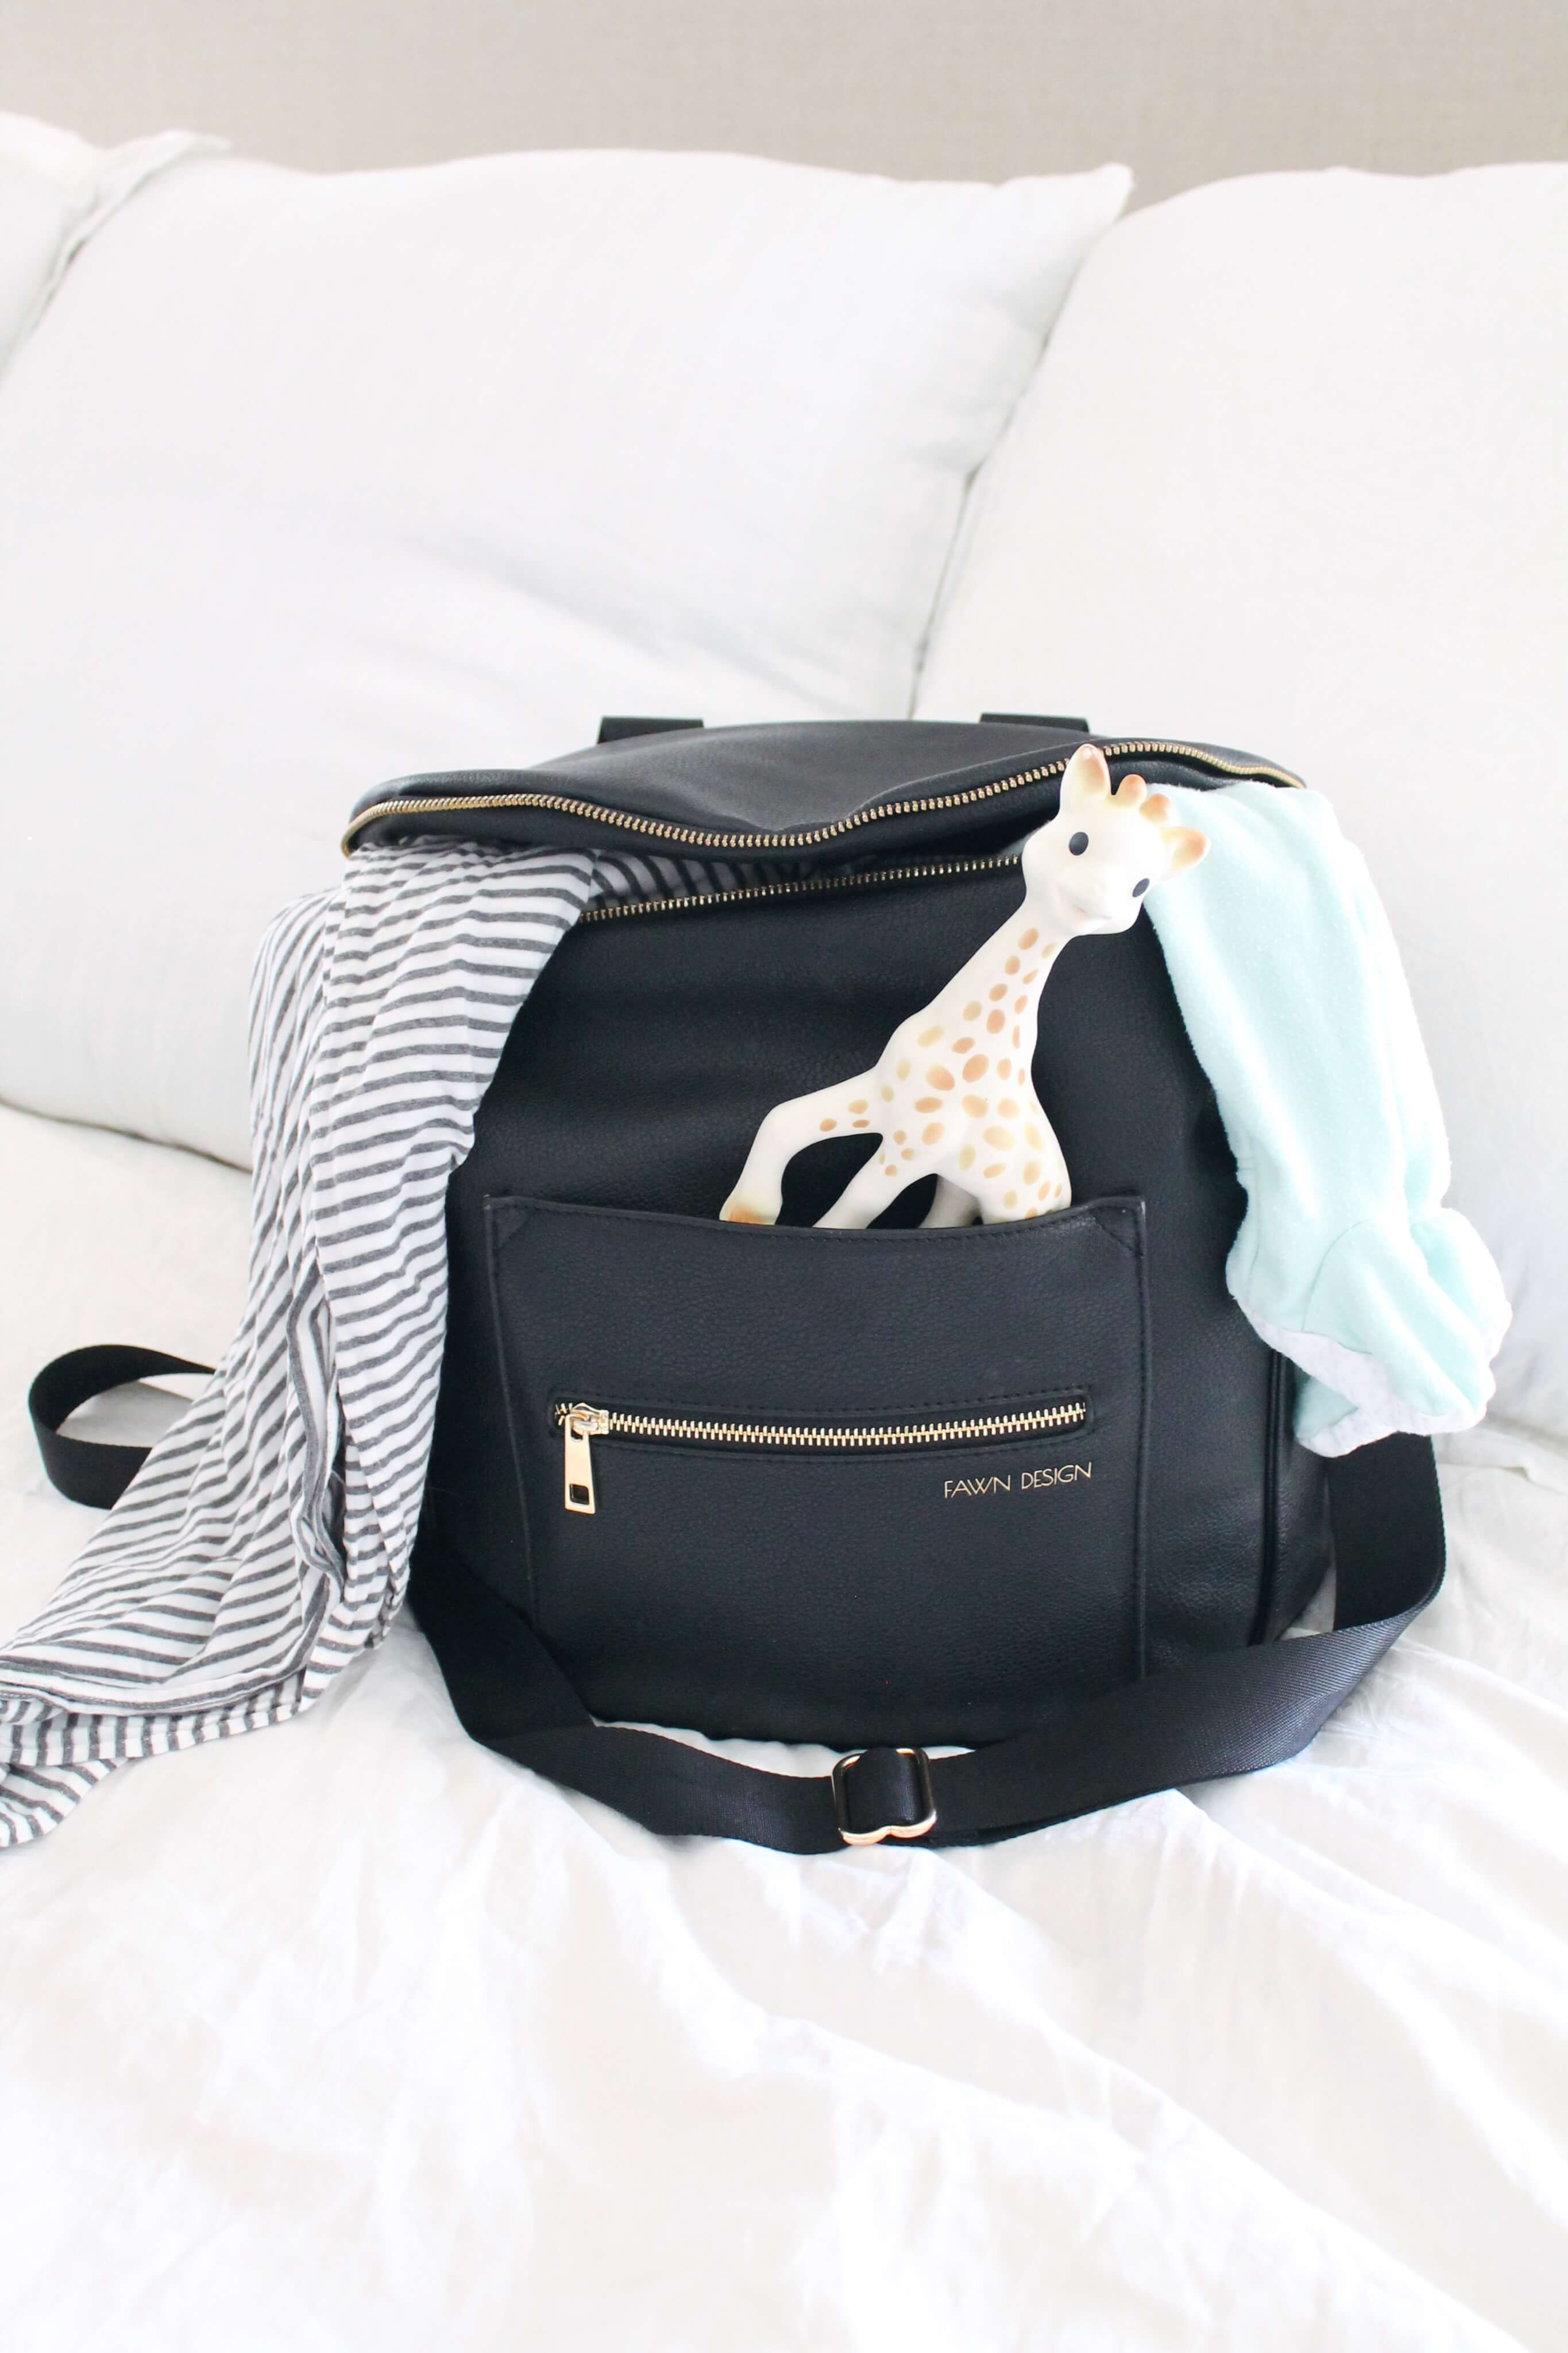 Packing Your Fawn Design Bag